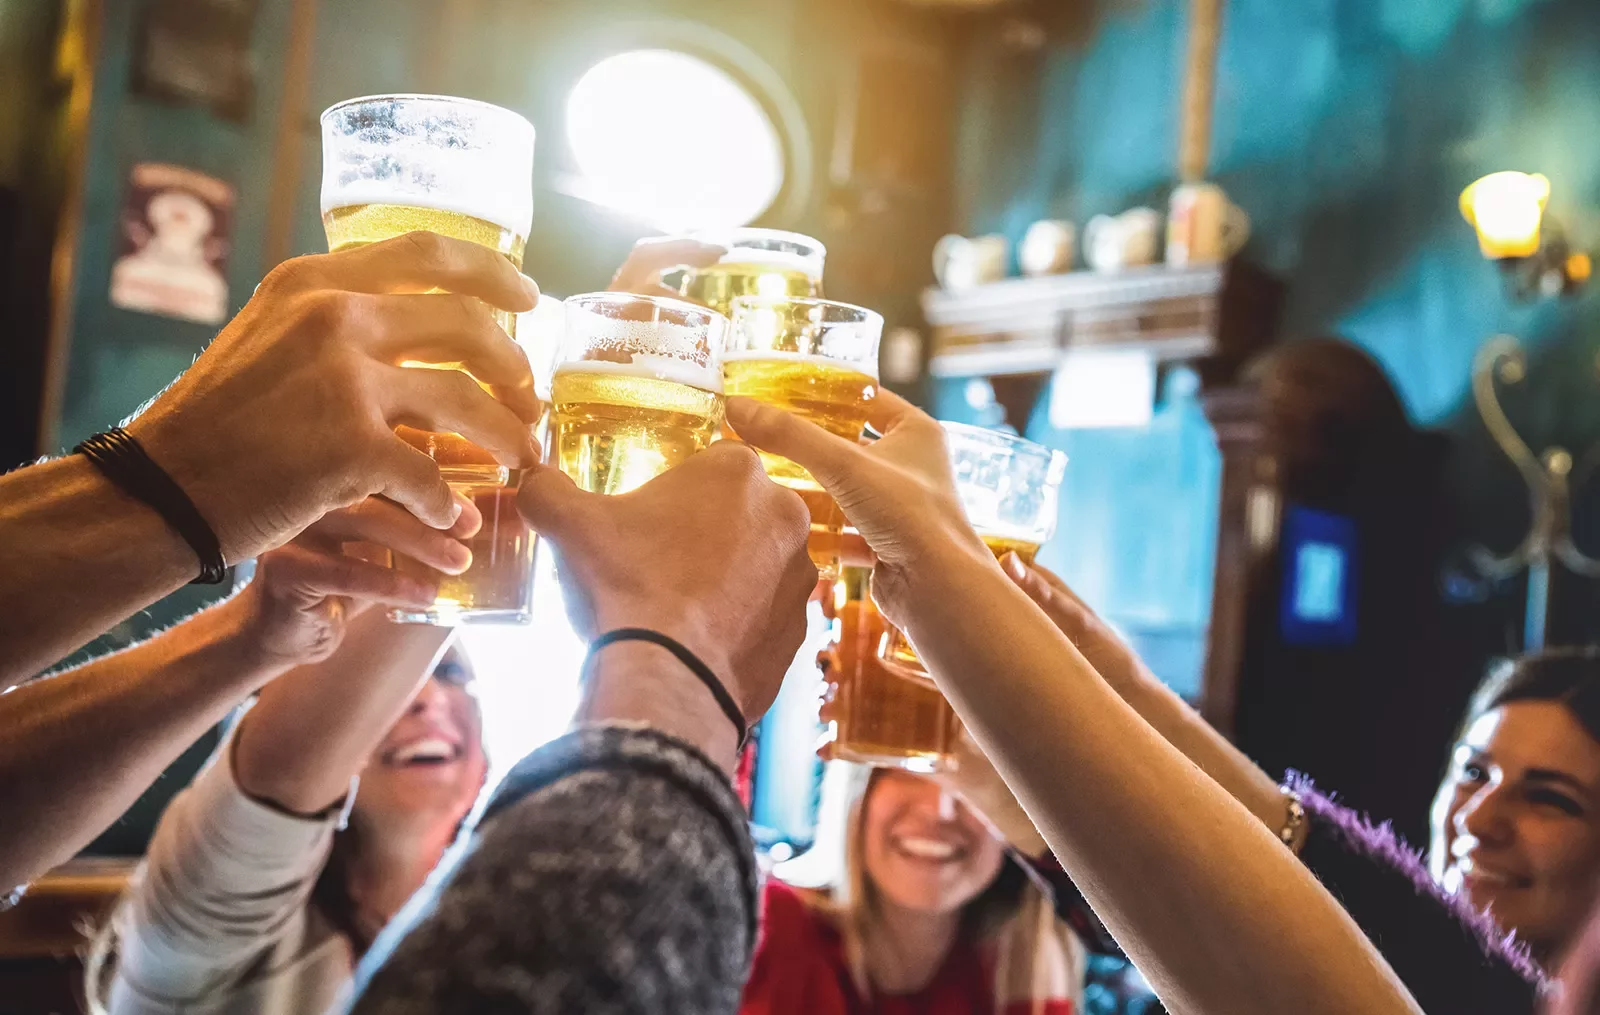 Group of people raising beer glasses for a toast